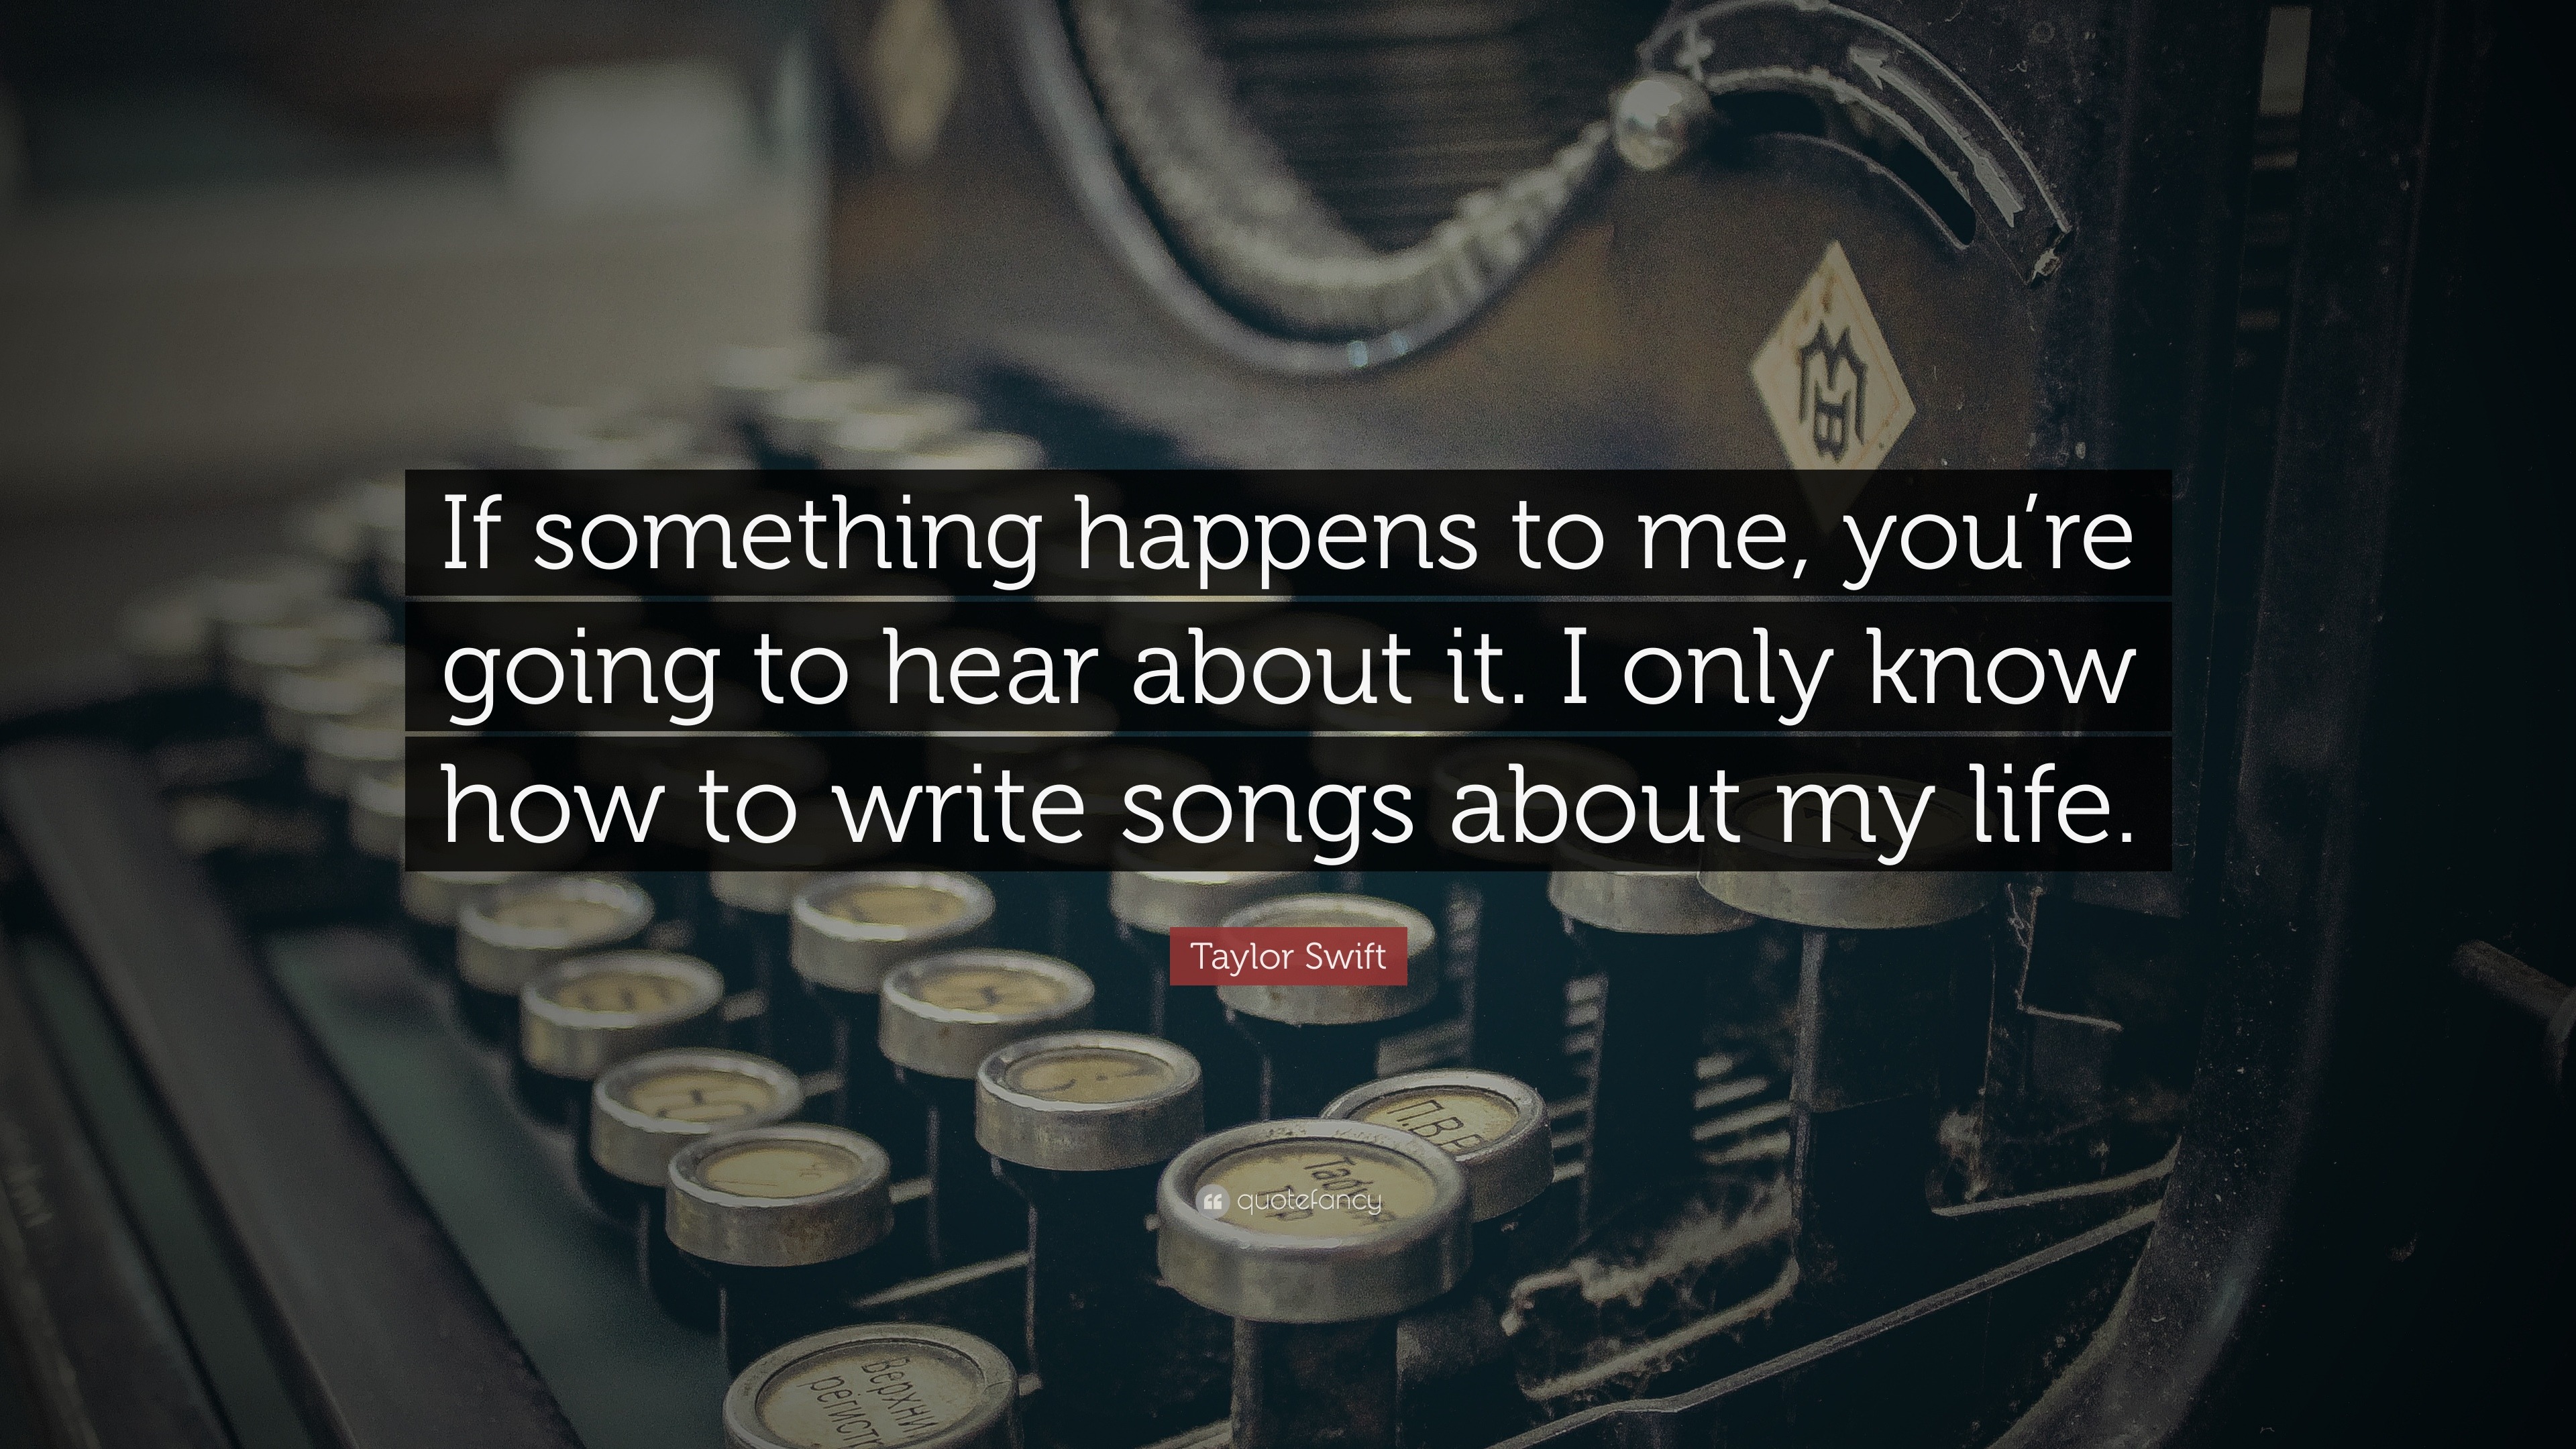 https://quotefancy.com/media/wallpaper/3840x2160/540066-Taylor-Swift-Quote-If-something-happens-to-me-you-re-going-to-hear.jpg